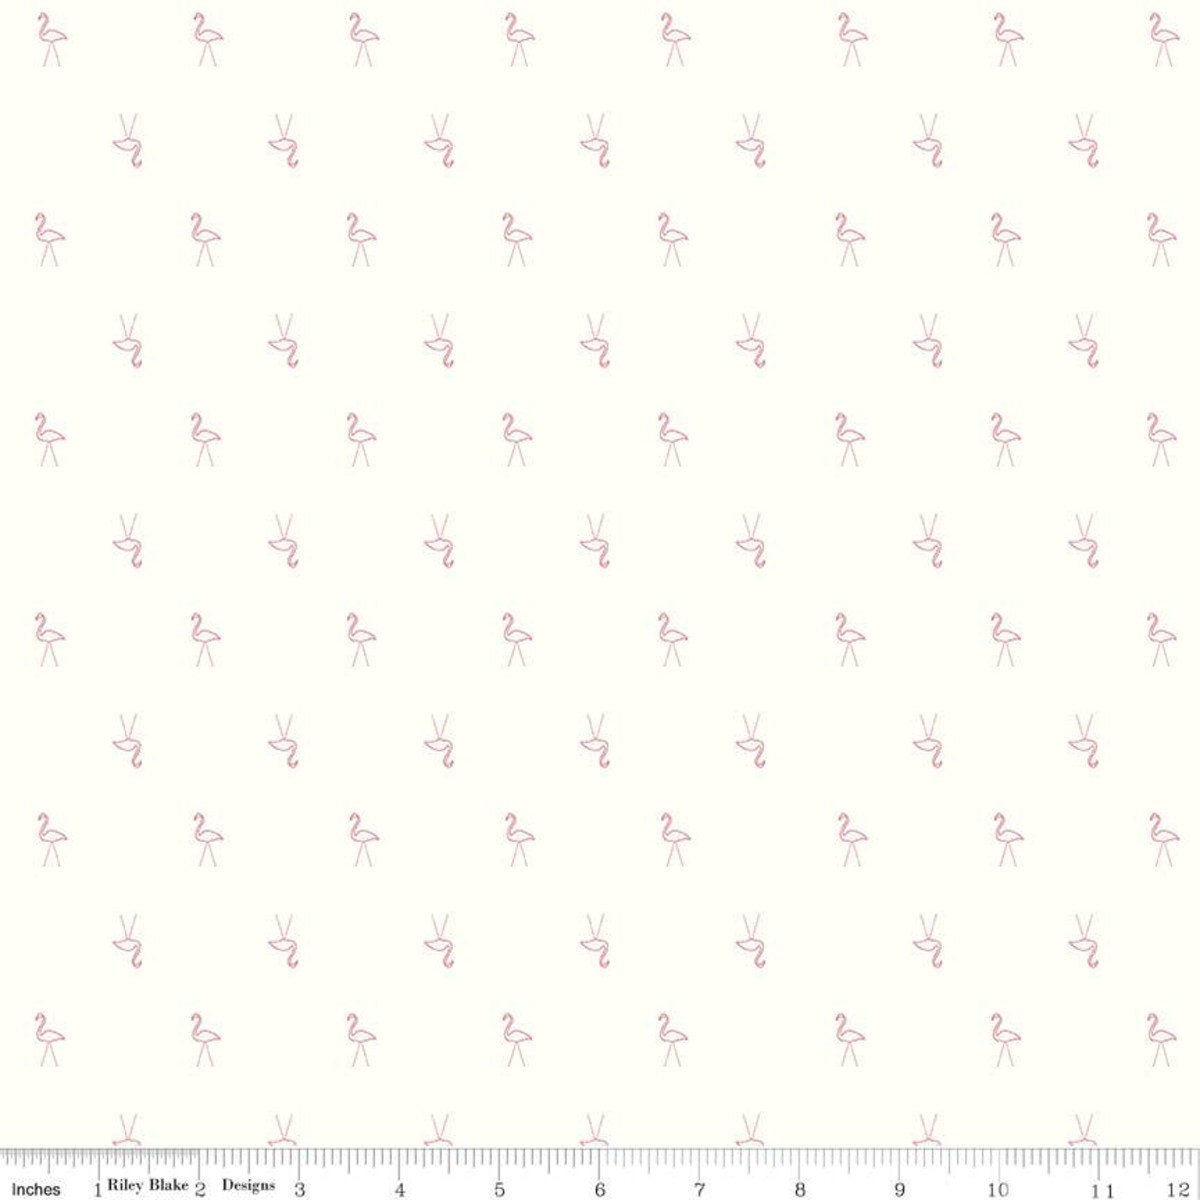 SALE Day in the Life Main C13660 Blush by Riley Blake Designs Floral  Flowers Quilting Cotton Fabric 